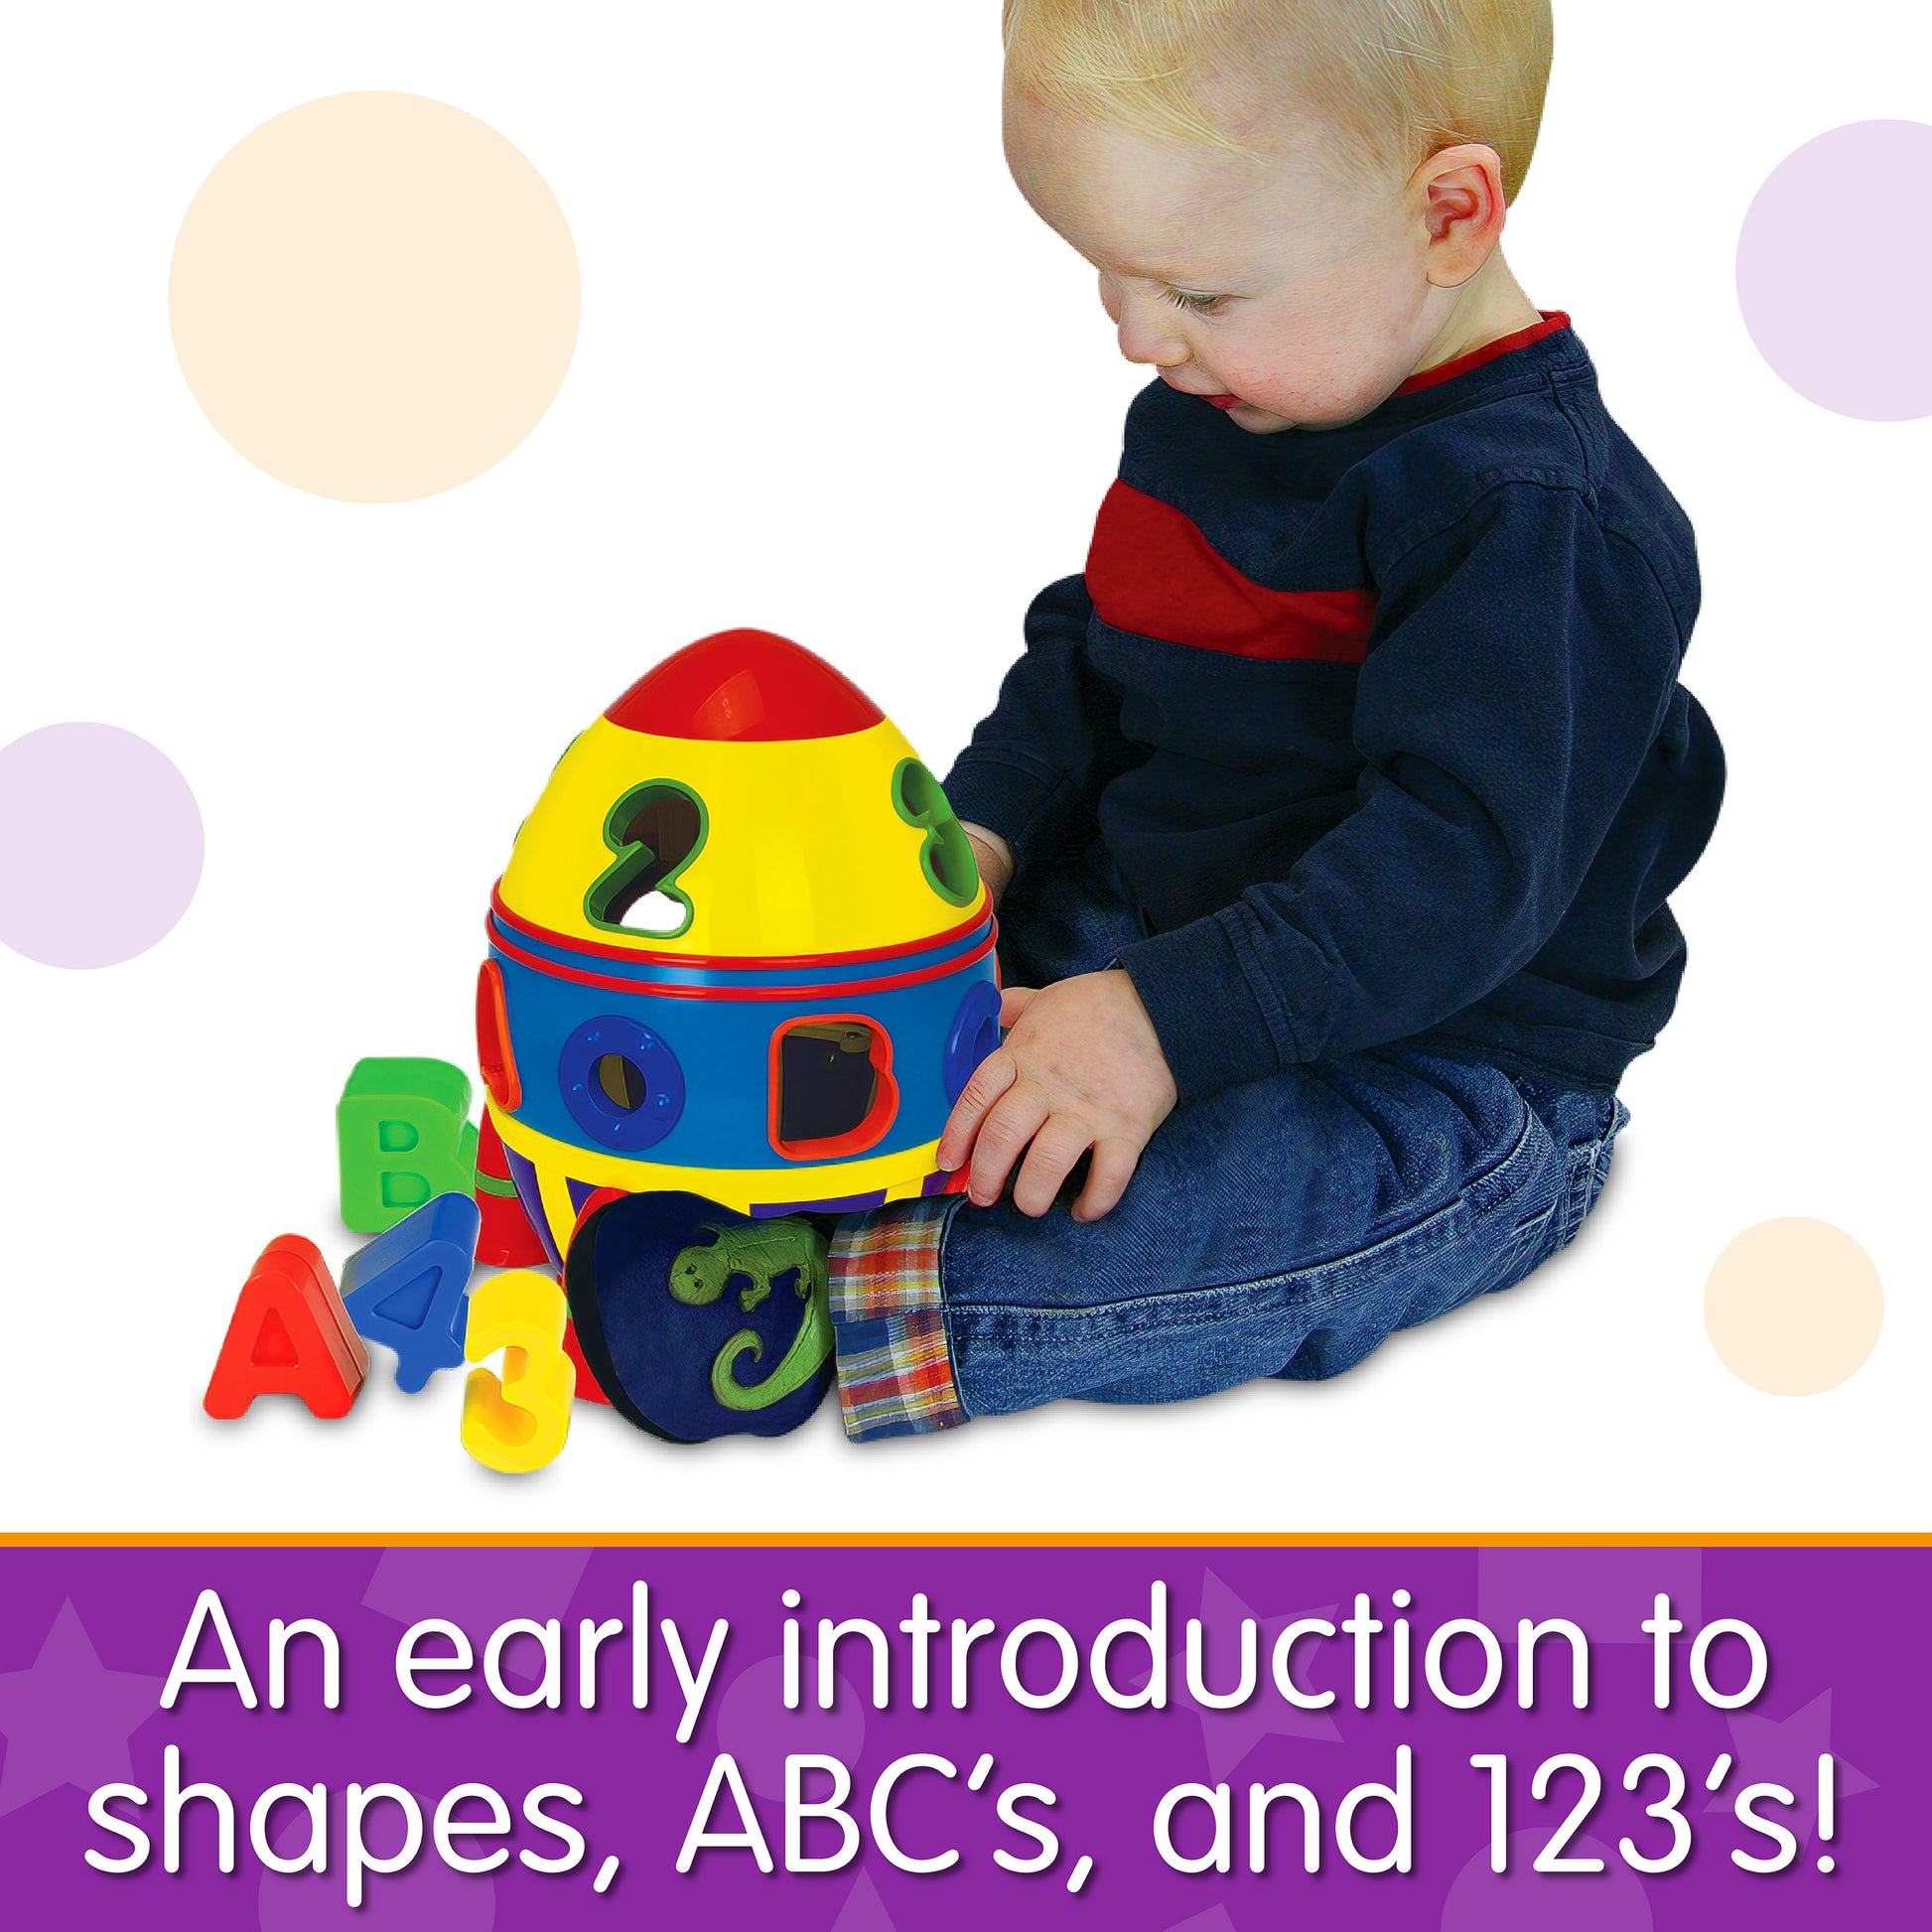 Infographic about Rocket Shape Sorter that says, "An early introduction to shapes, ABC's, and 123's!"